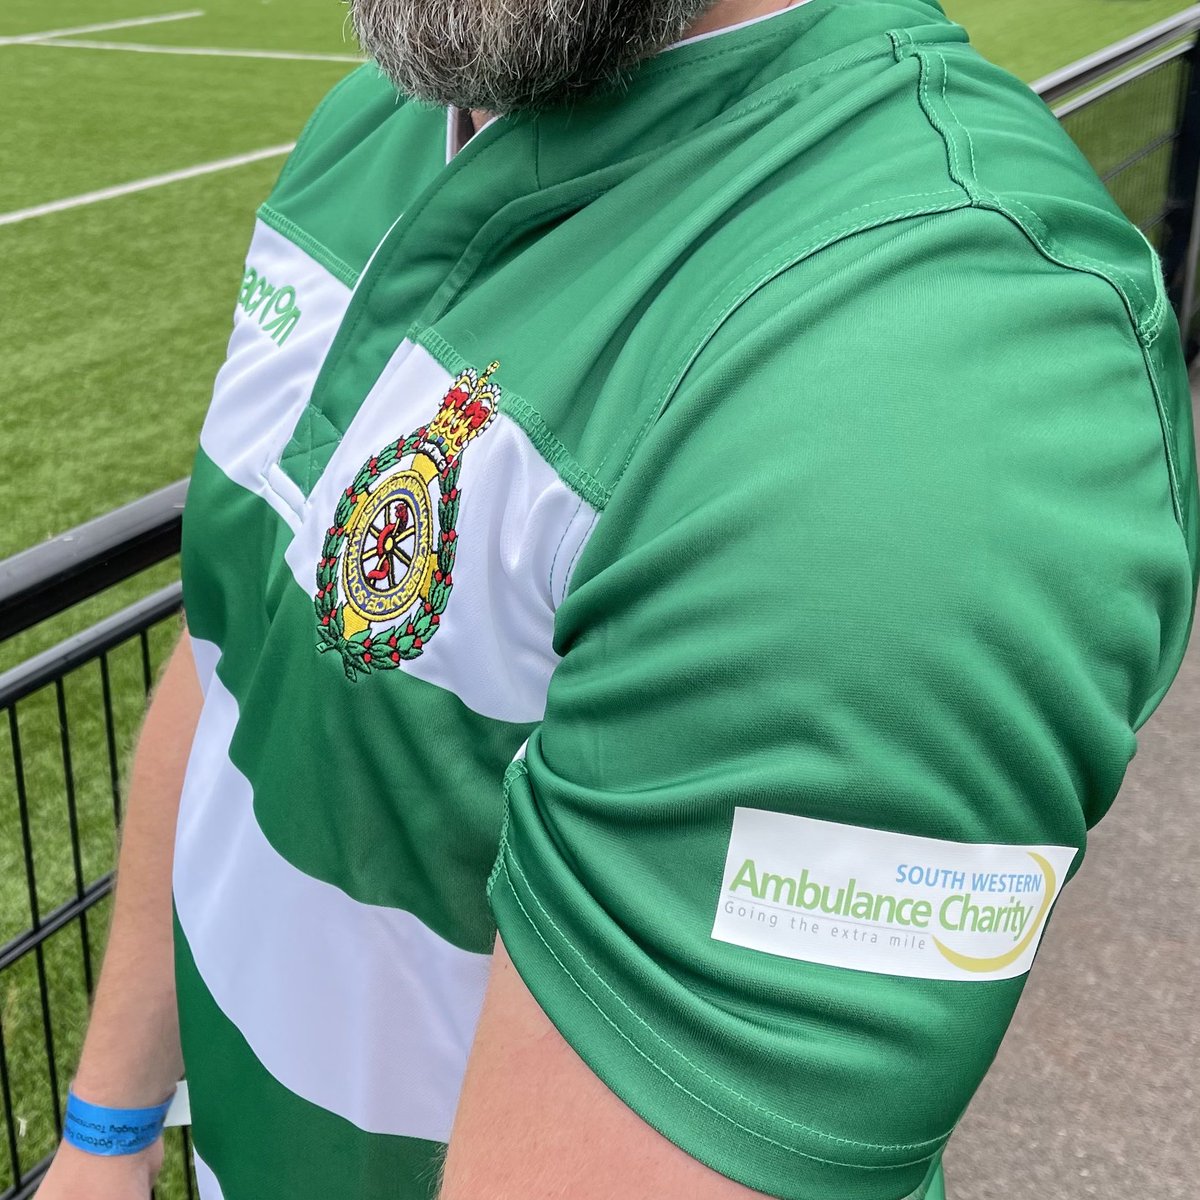 A big shout out to our @BNSSG_SWASFT colleagues and friends who competed in the Ratana Emergency Services Touch Rugby Tournament Bristol in aid of @Try4Matt. Thank you to all those who showed your support, especially @macronbristol & @swa_charity for suppling this amazing kit! 🙌🏼